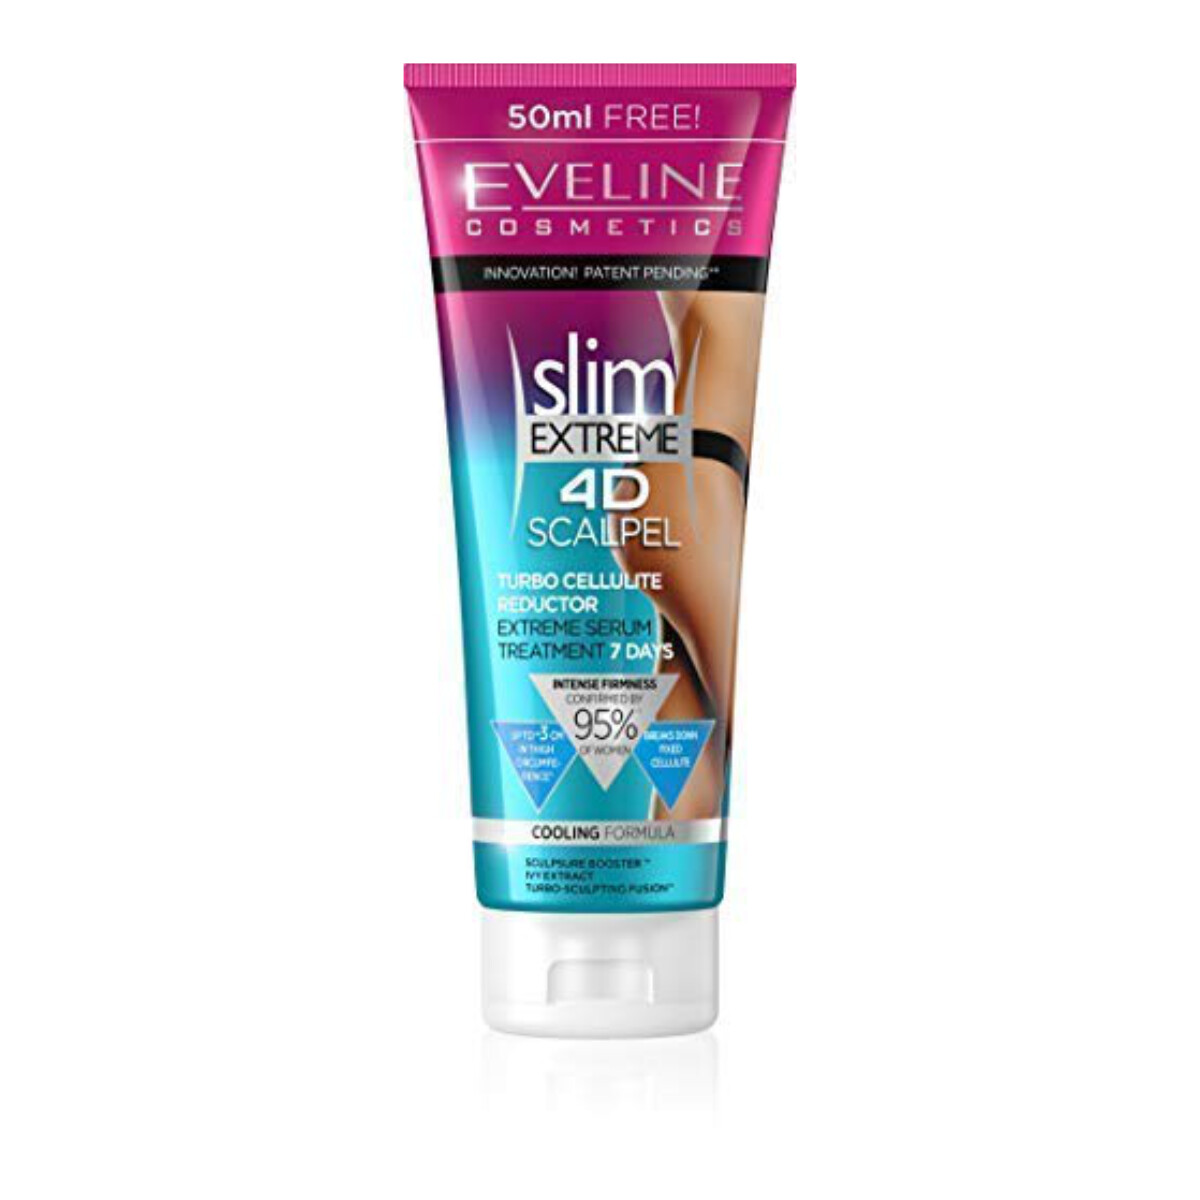 Slim Extreme 4D Scalpel Turbo Cellulite Reductor Cream with Cooling Formula (T)